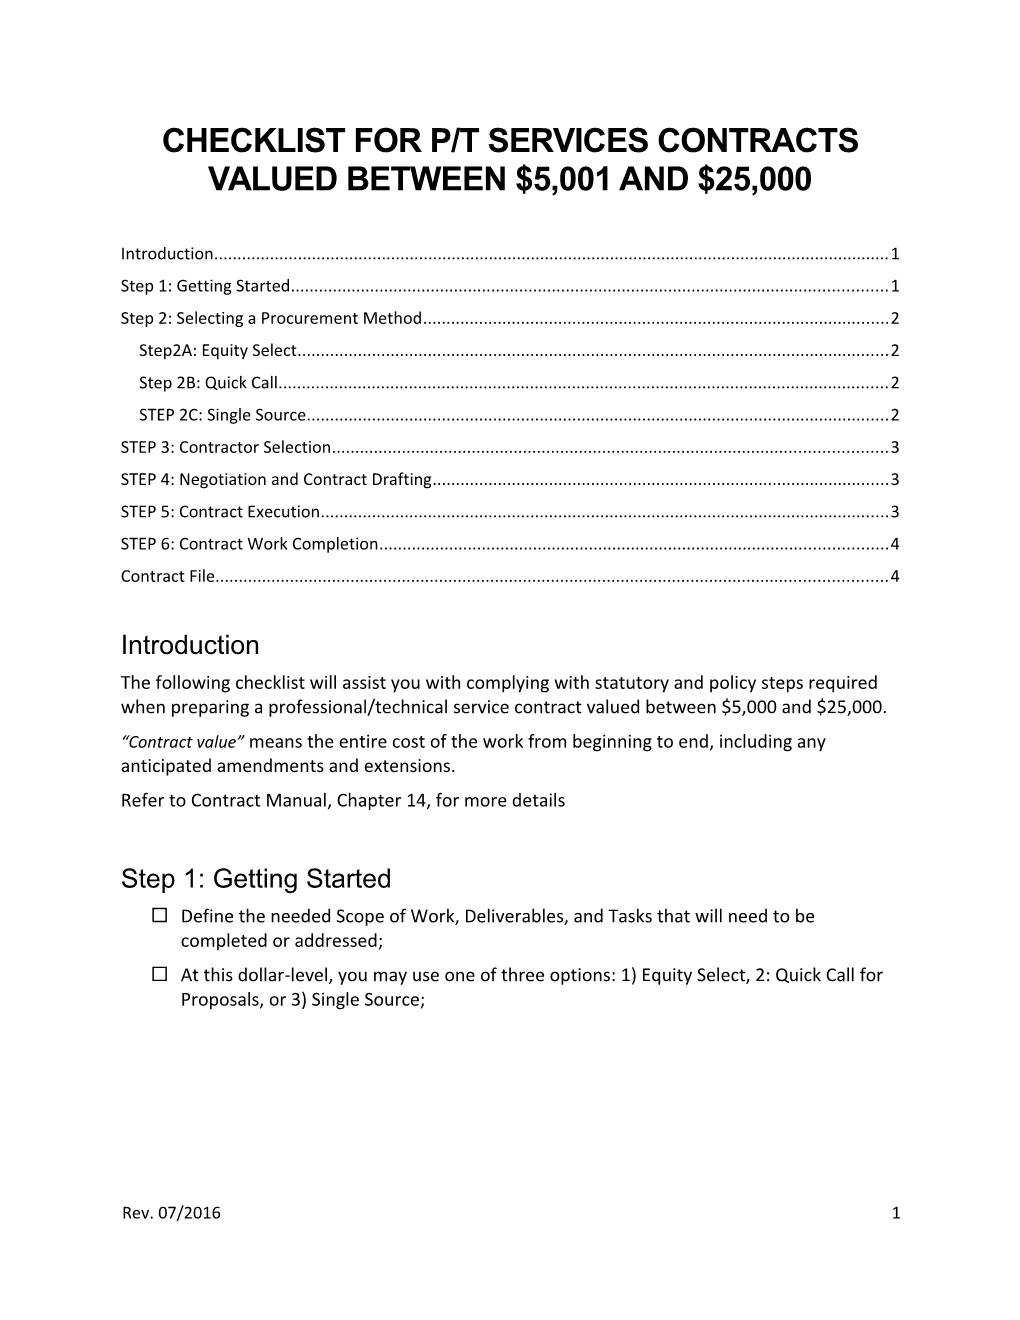 Checklist for P/T Services Contracts Valued Between $5,001 and $25,000